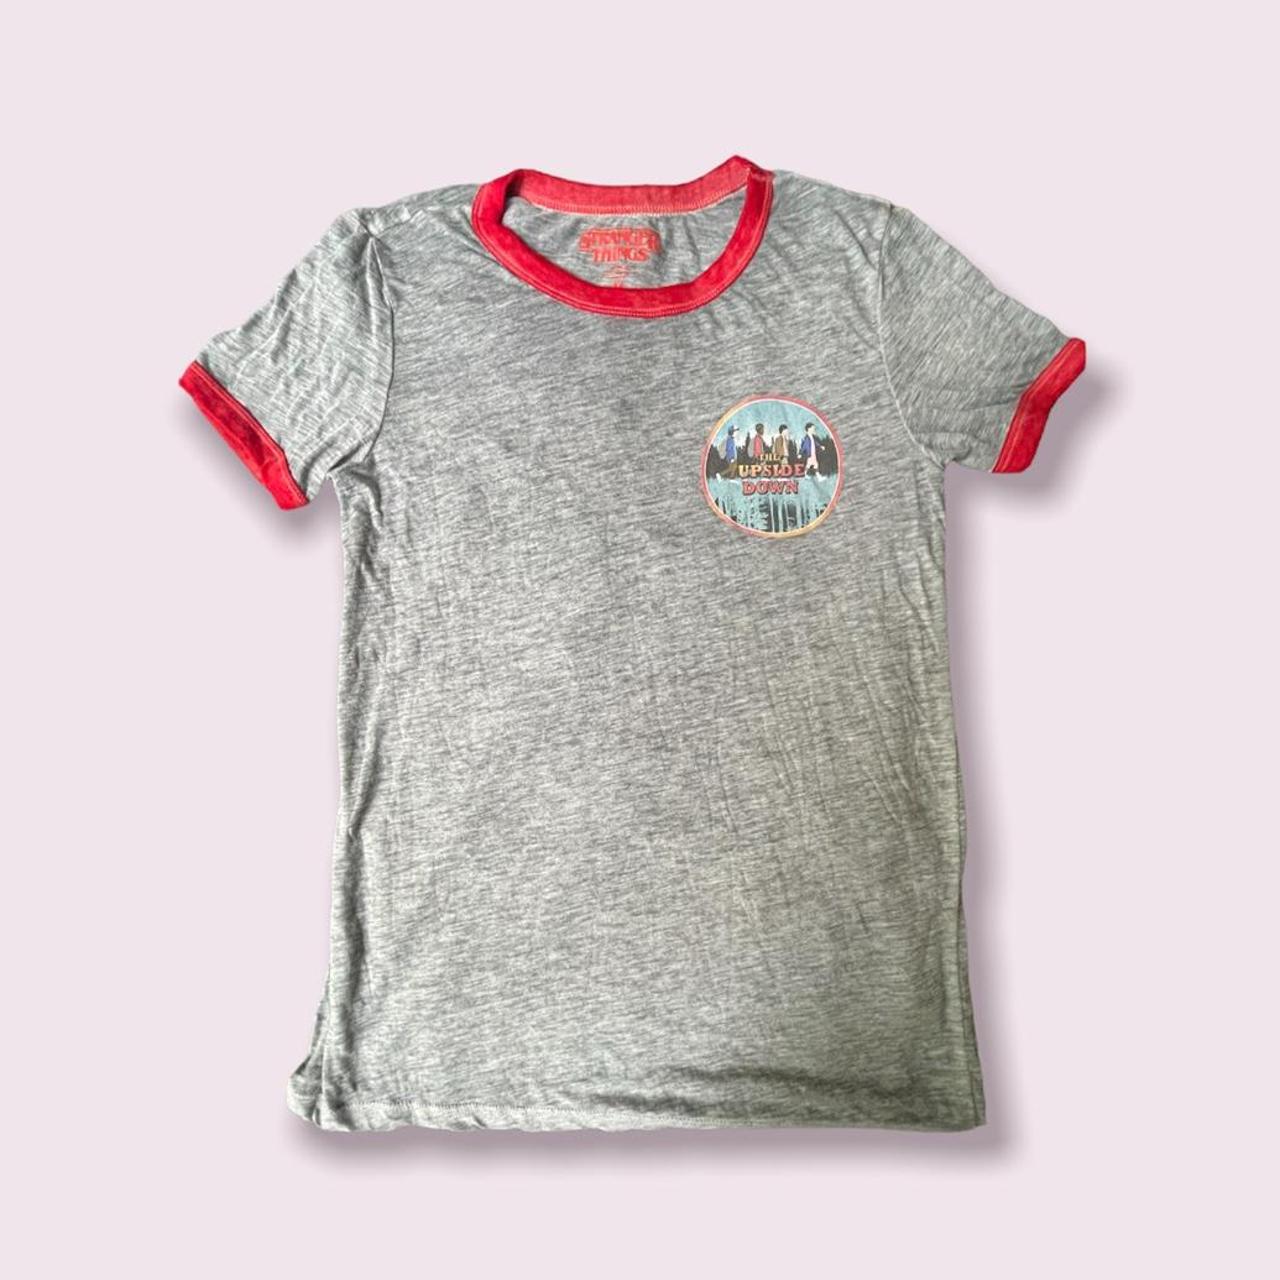 Adolescent Clothing Women's Grey and Red T-shirt